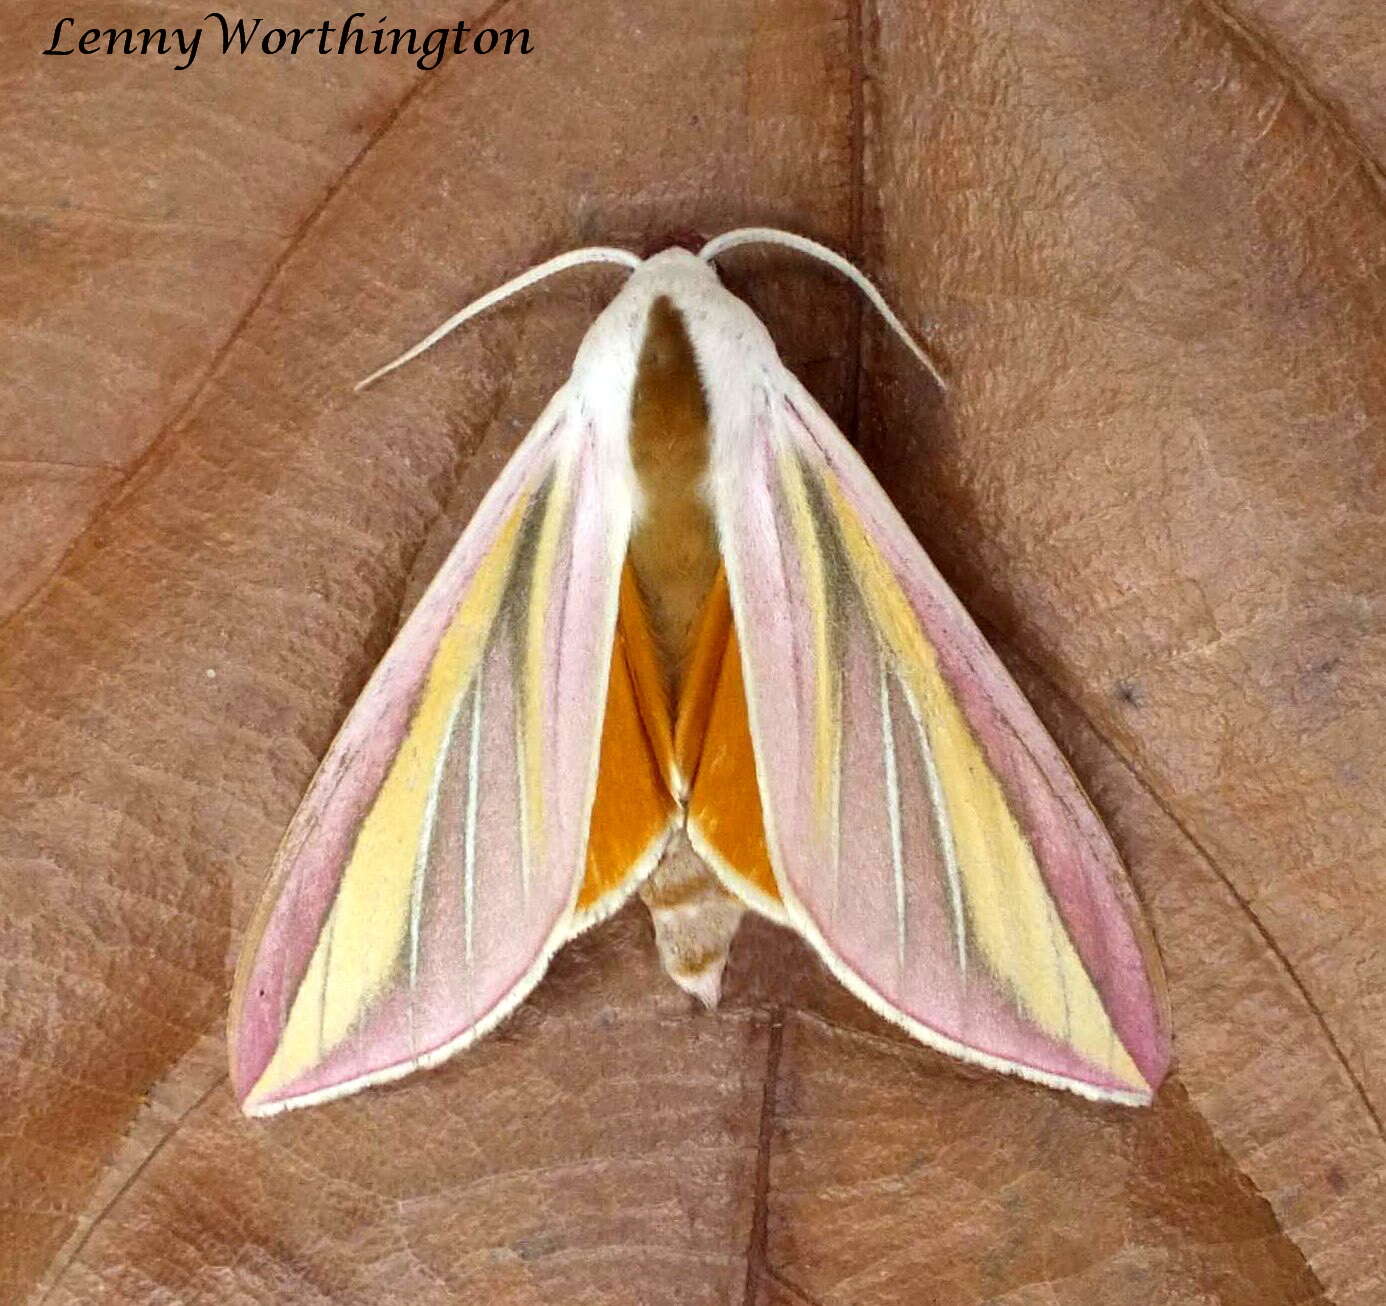 Image of Large candy-striped hawkmoth